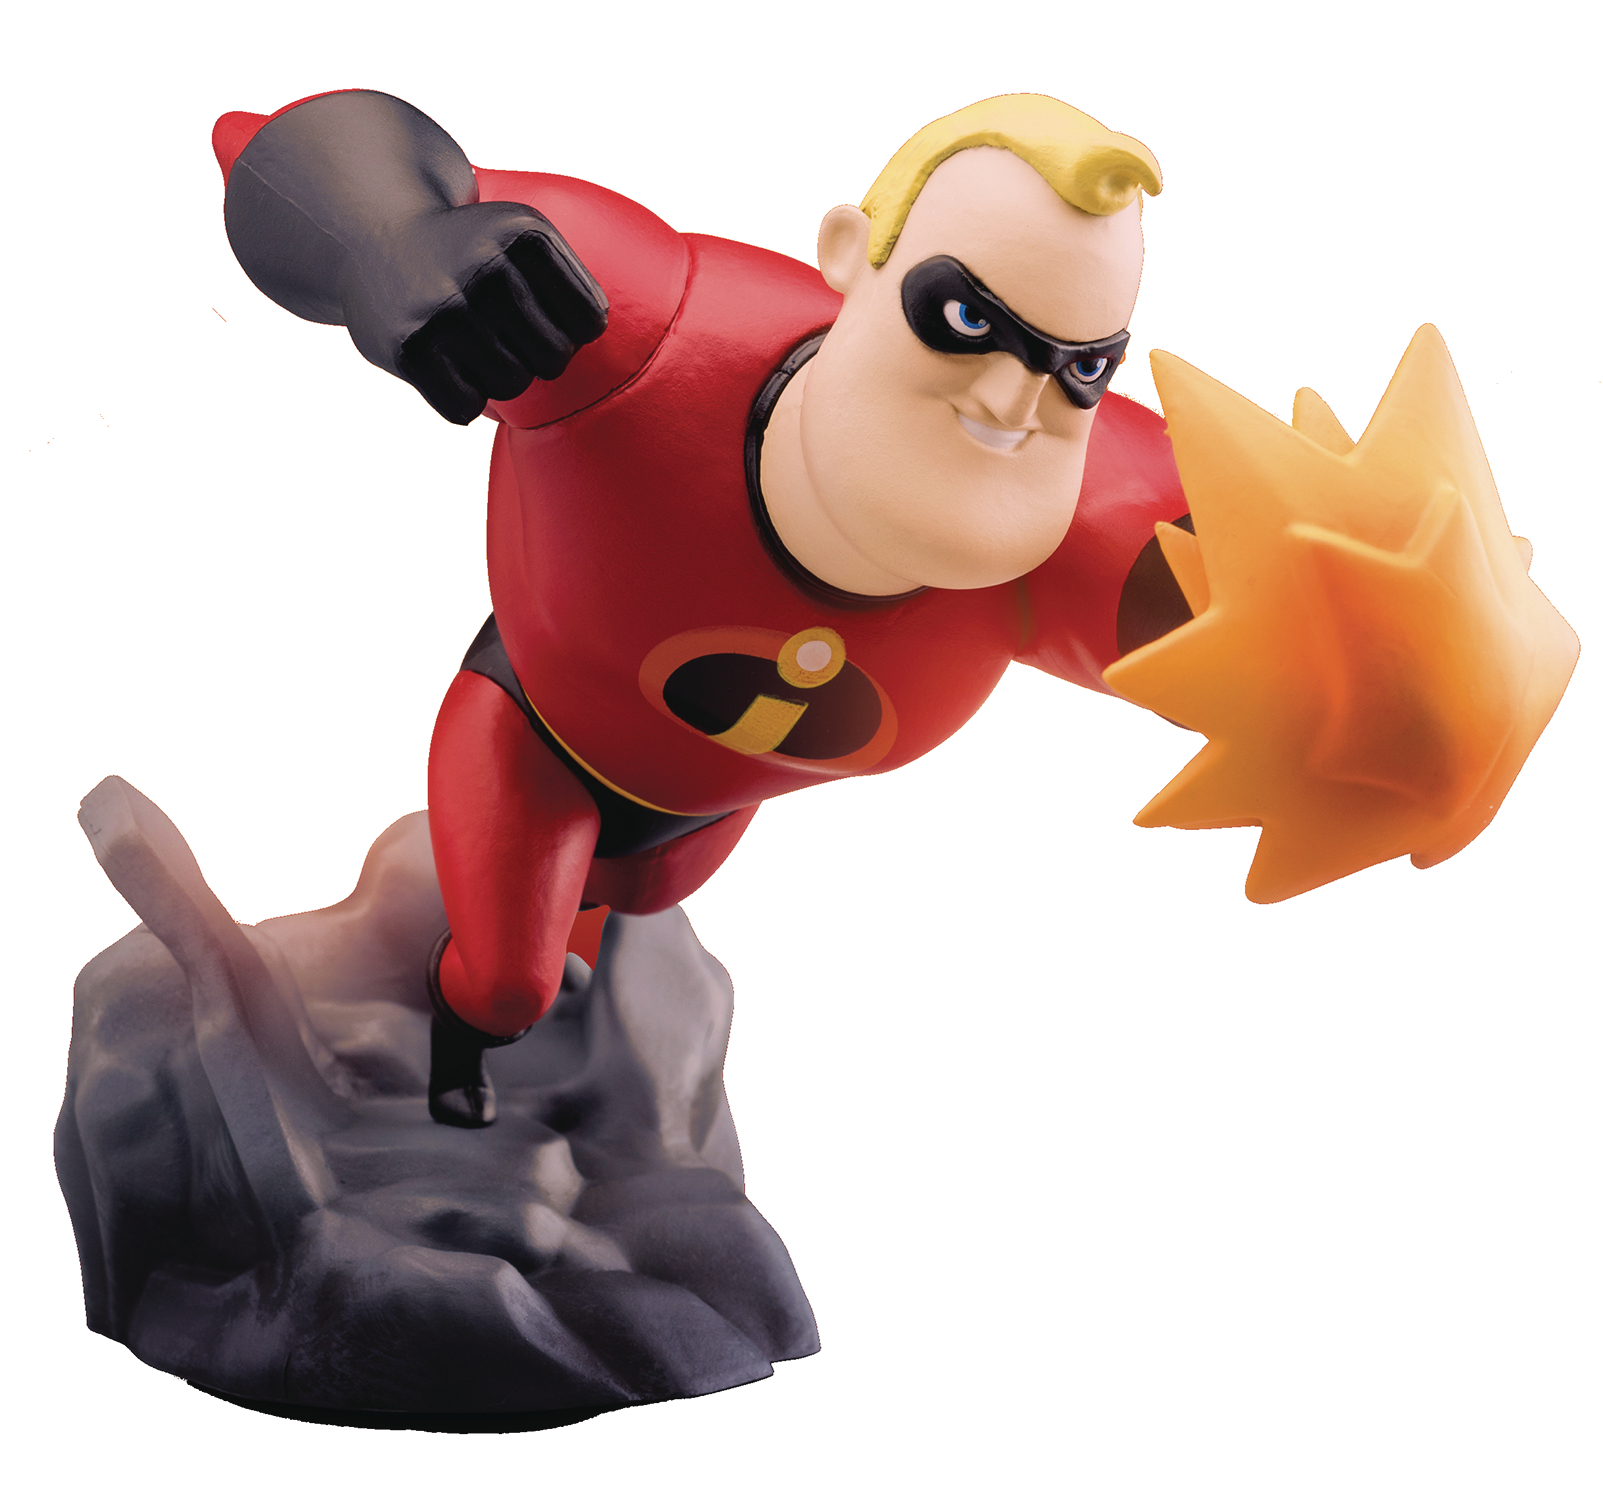 INCREDIBLES MEA-005 MR INCREDIBLE PX FIG (OCT188182)